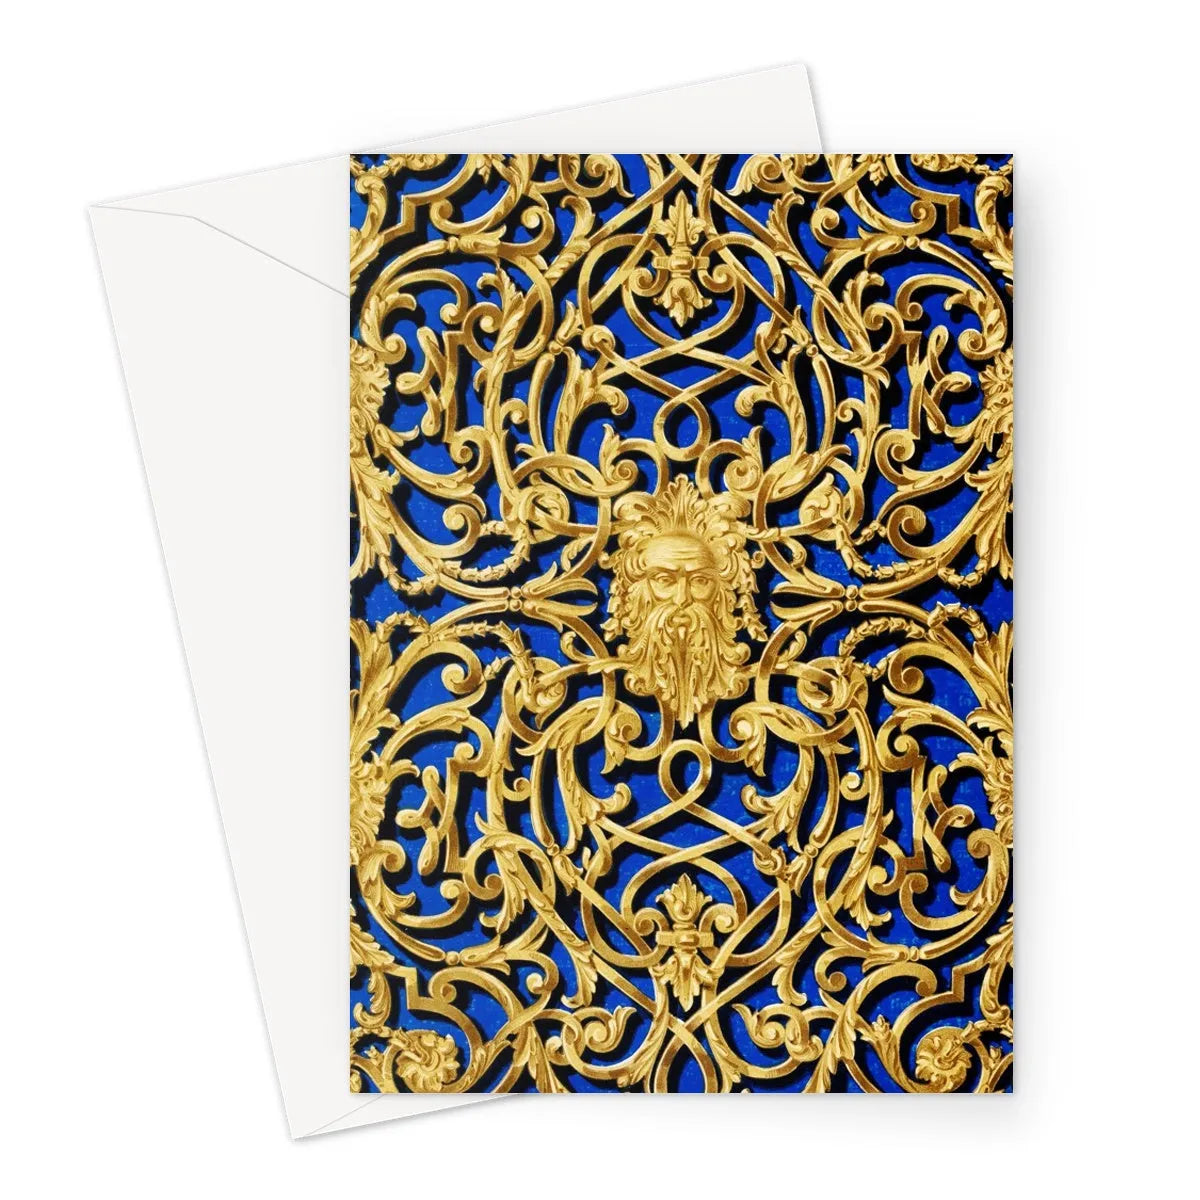 Open-work Panel - Sir Matthew Digby Wyatt Greeting Card - A5 Portrait / 1 Card - Greeting & Note Cards - Aesthetic Art